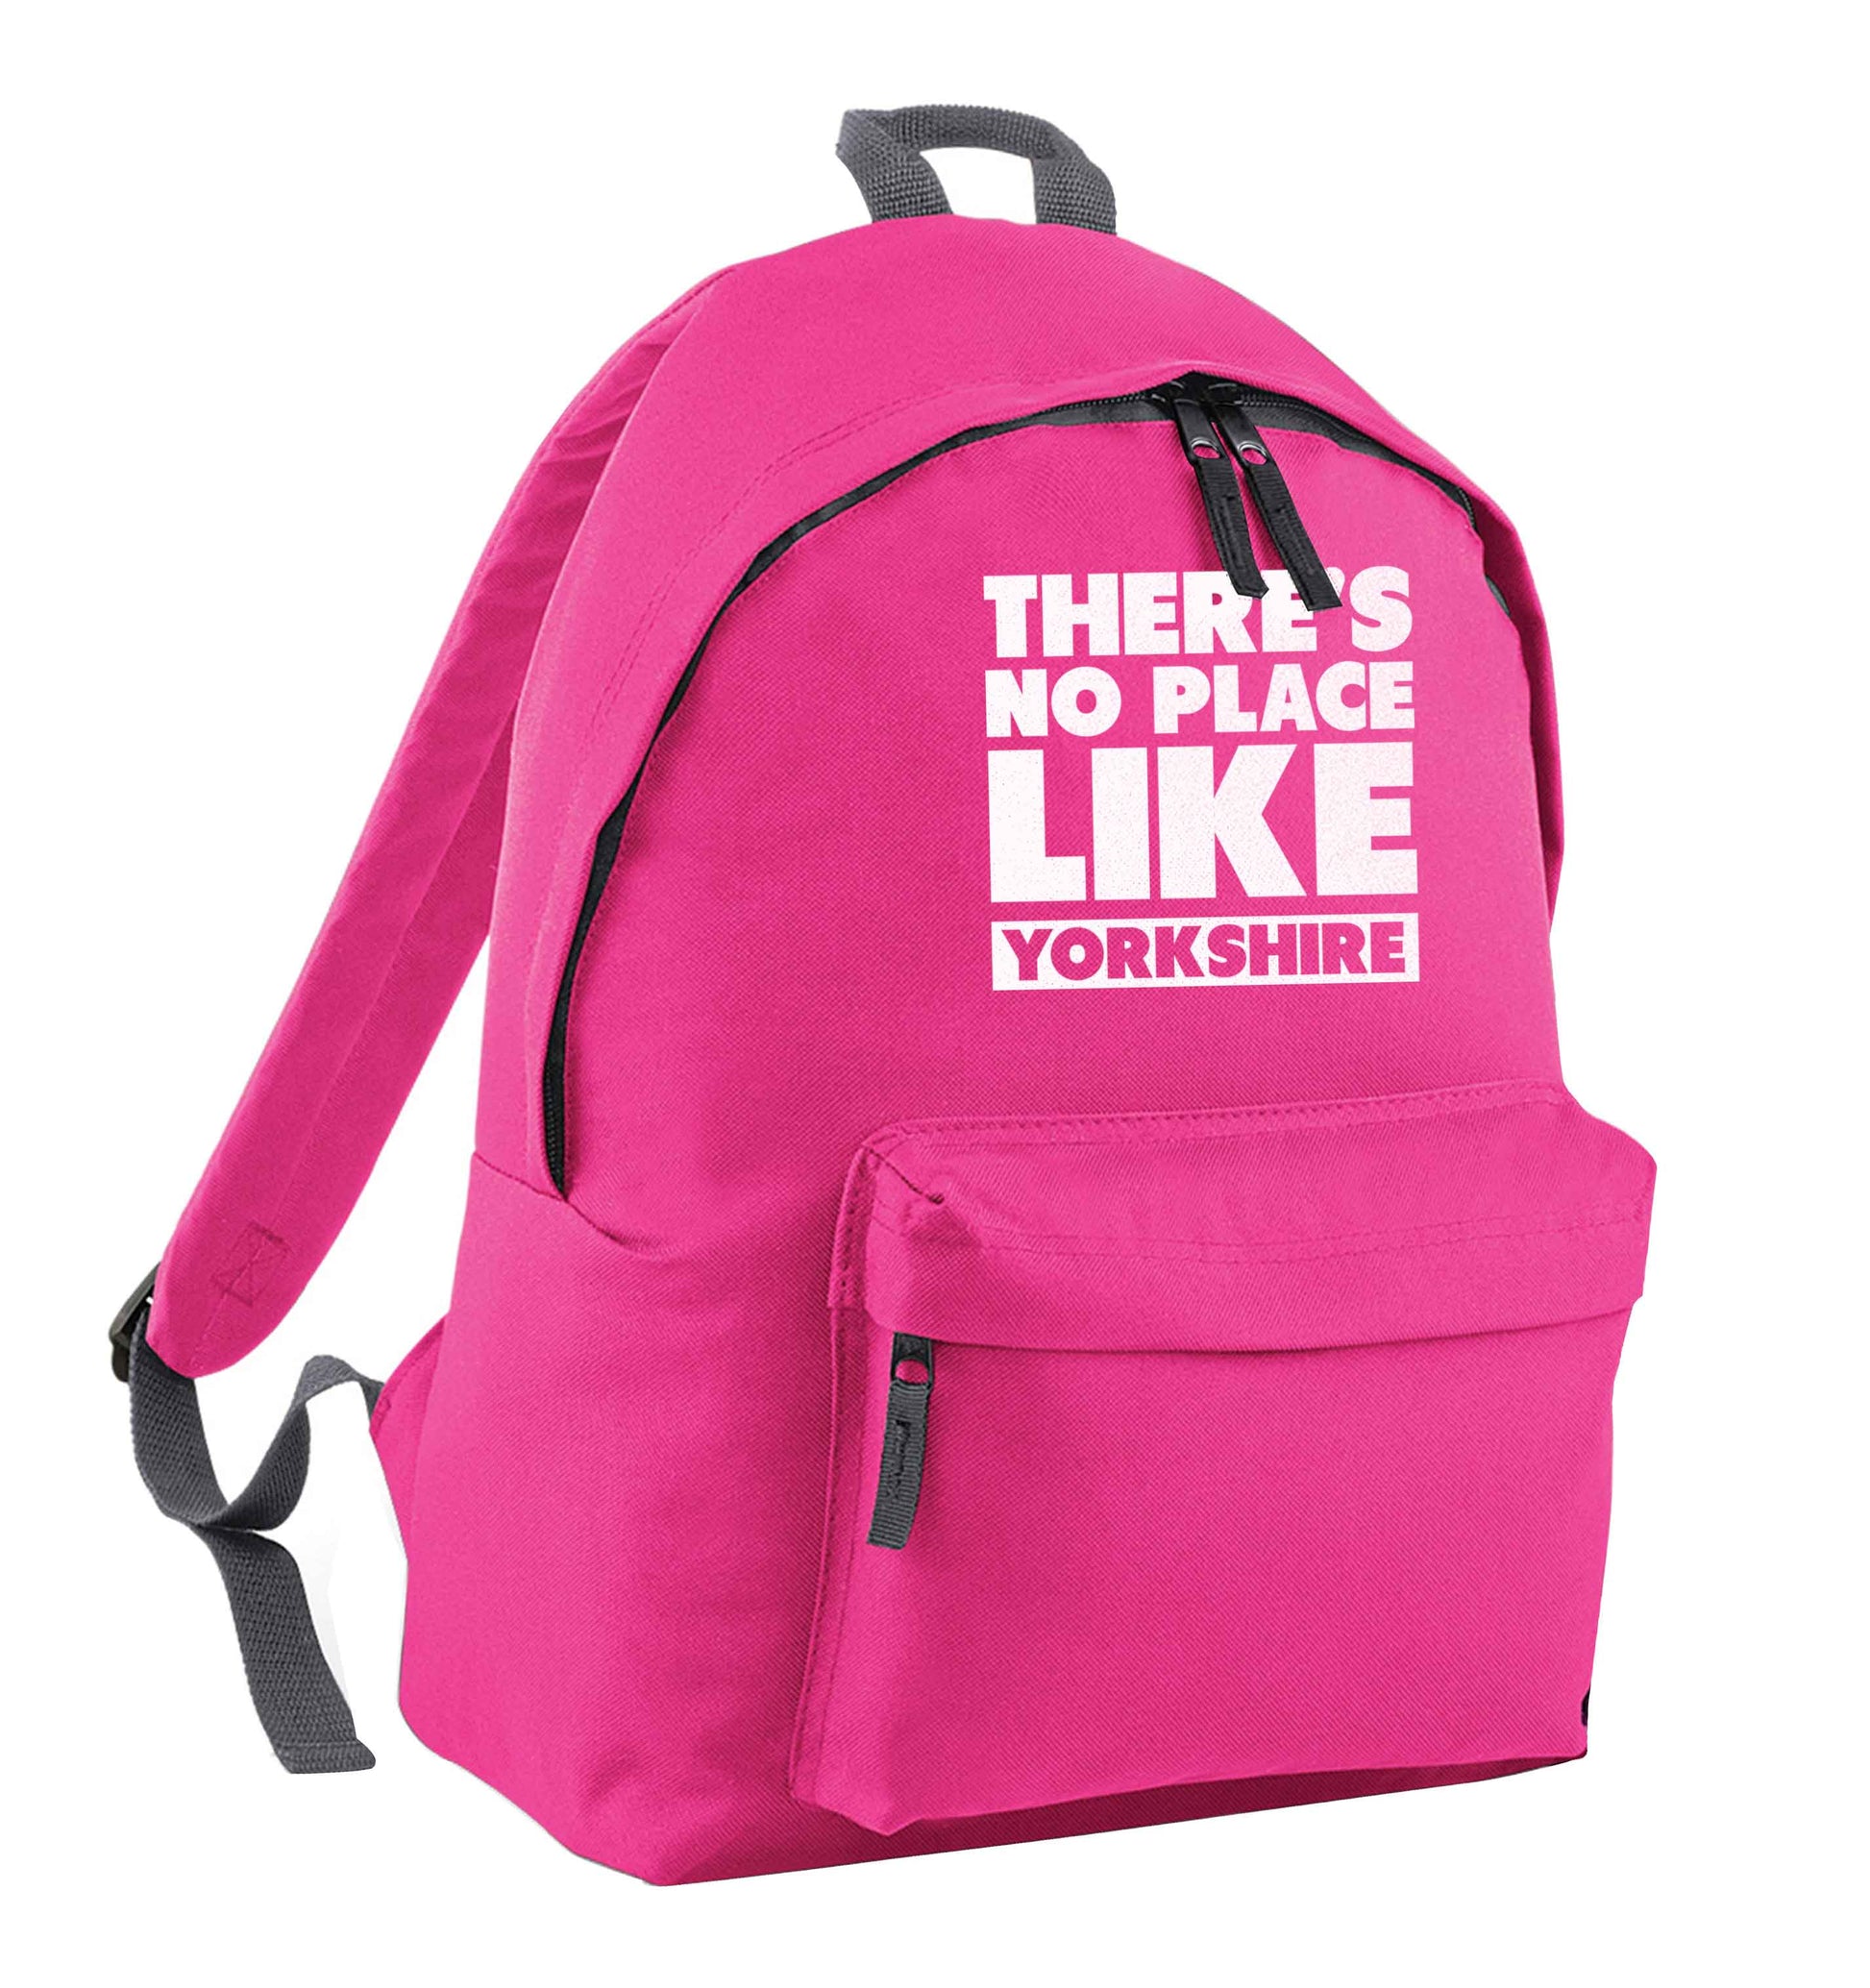 There's no place like Yorkshire pink adults backpack